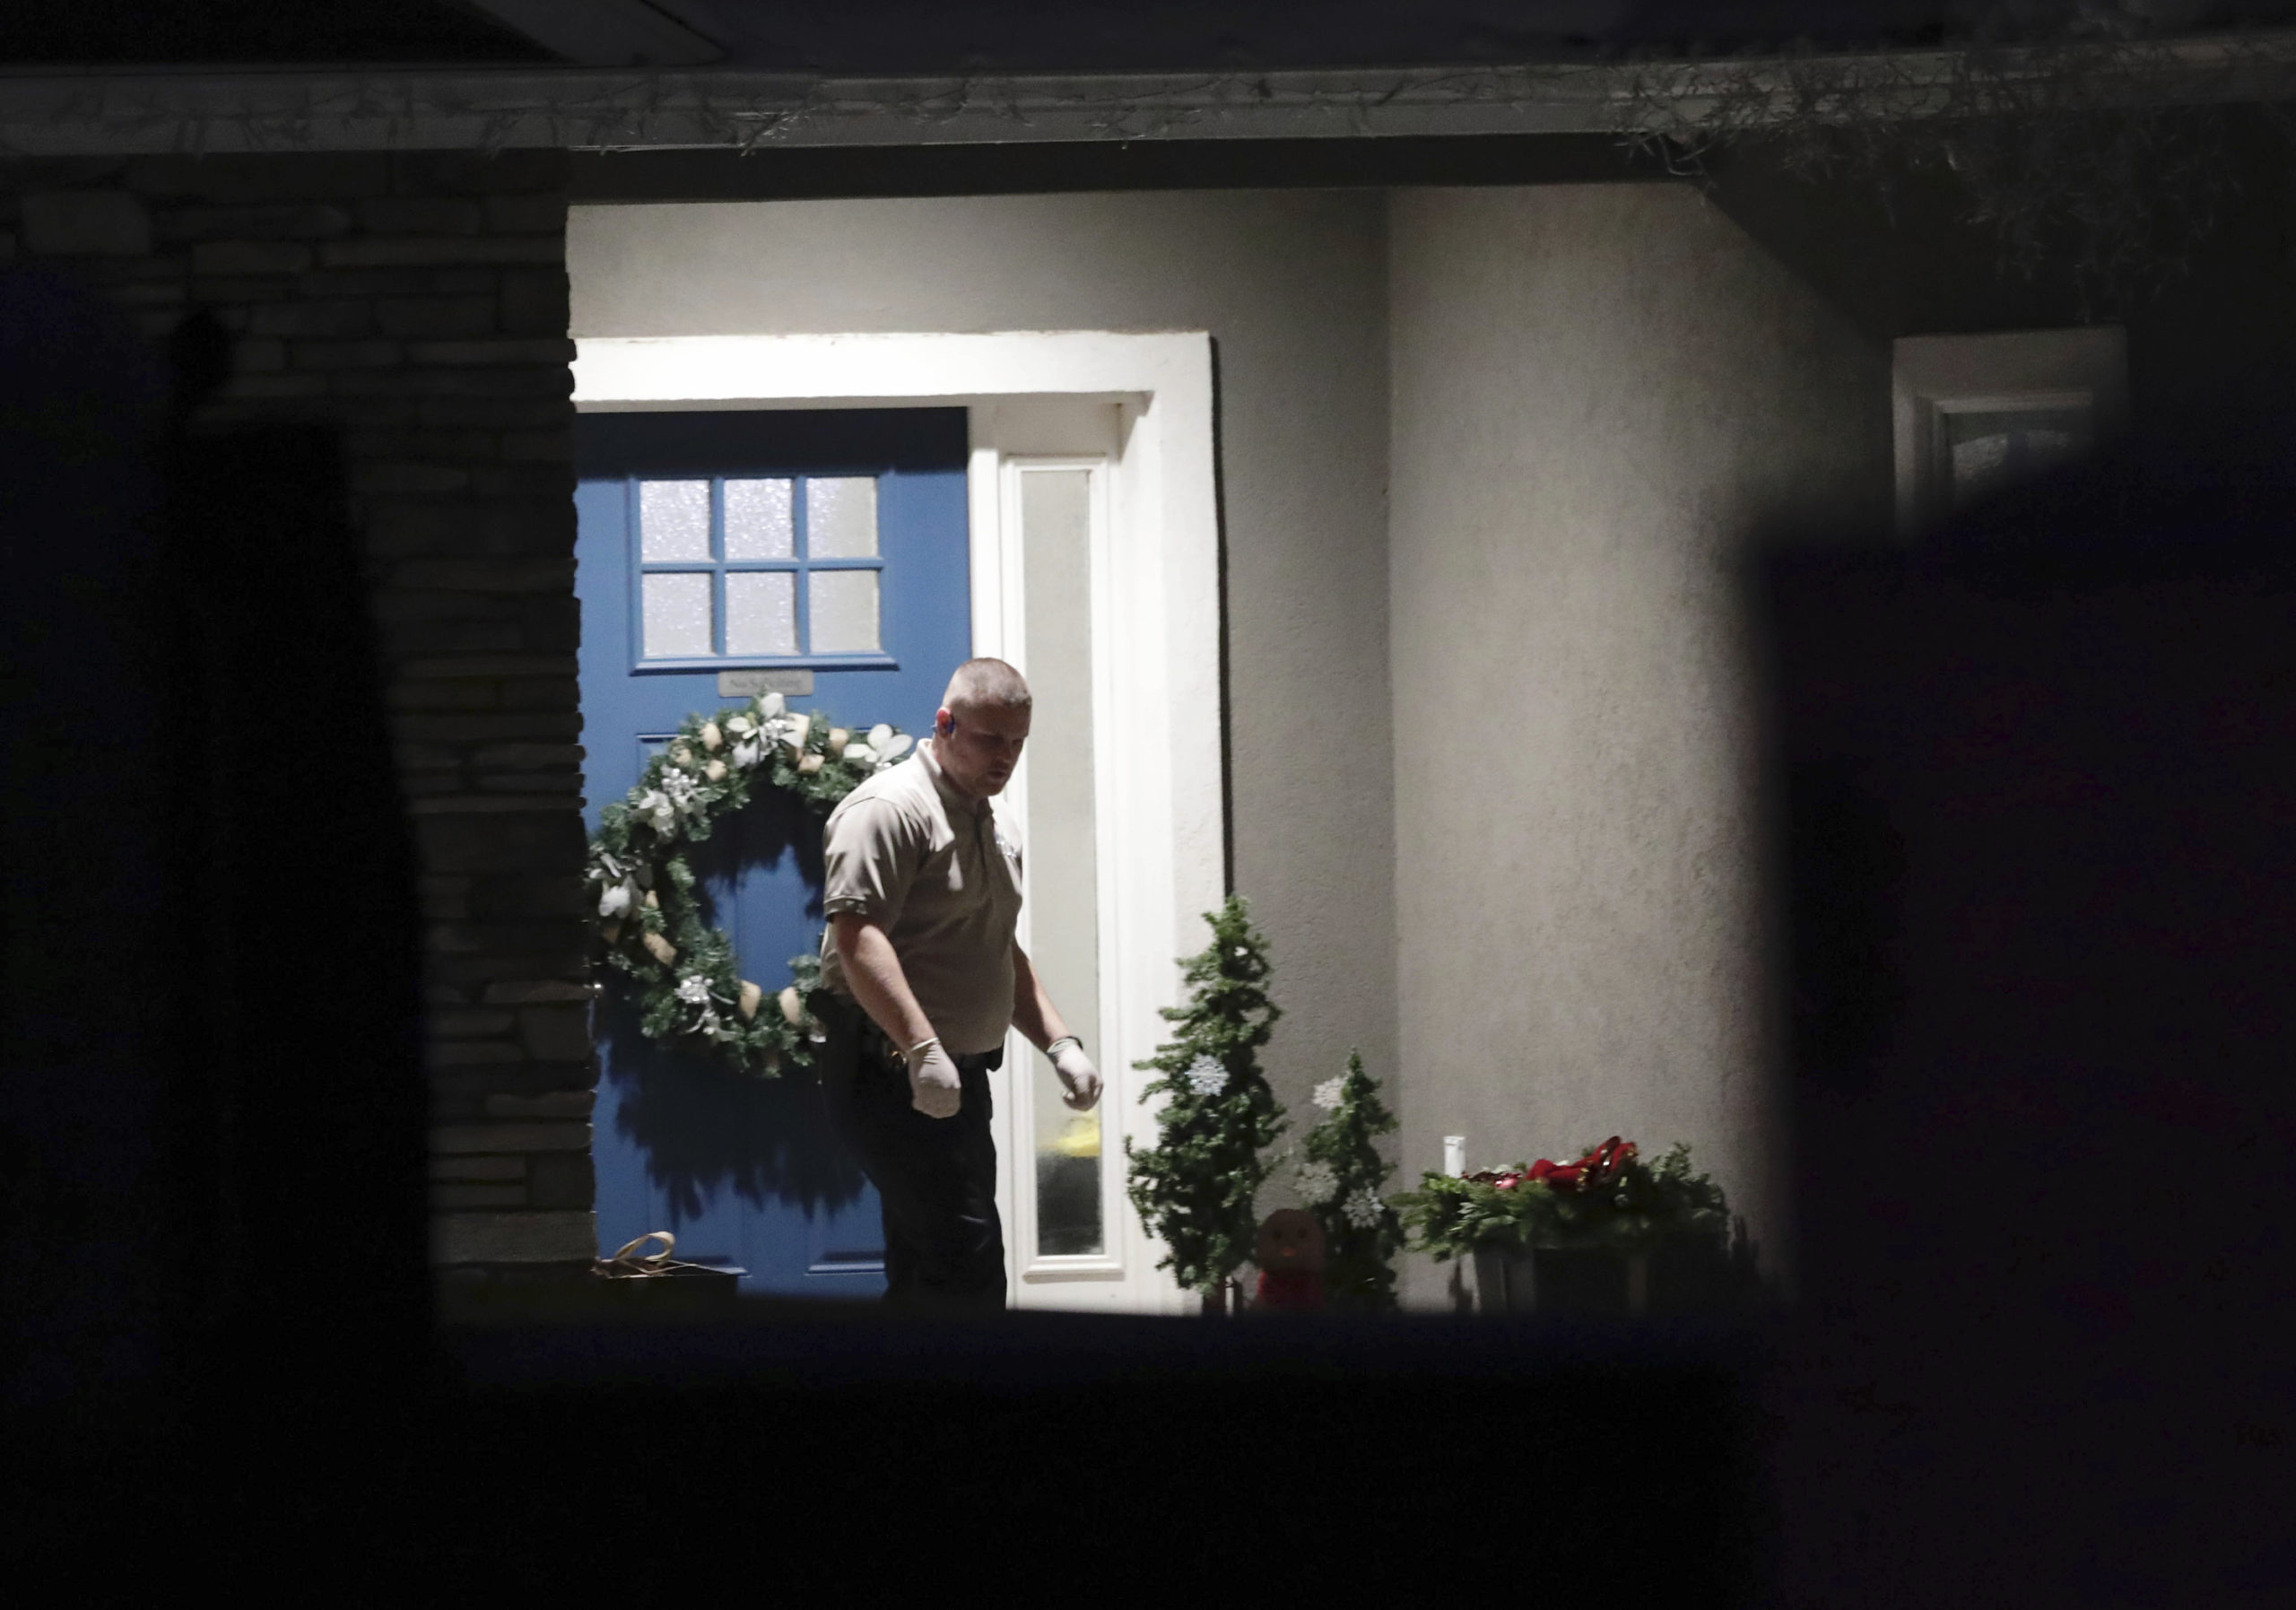 A law enforcement official stands near the front door of the Enoch, Utah, home where eight family members were found dead from gunshot wounds on Wednesday.